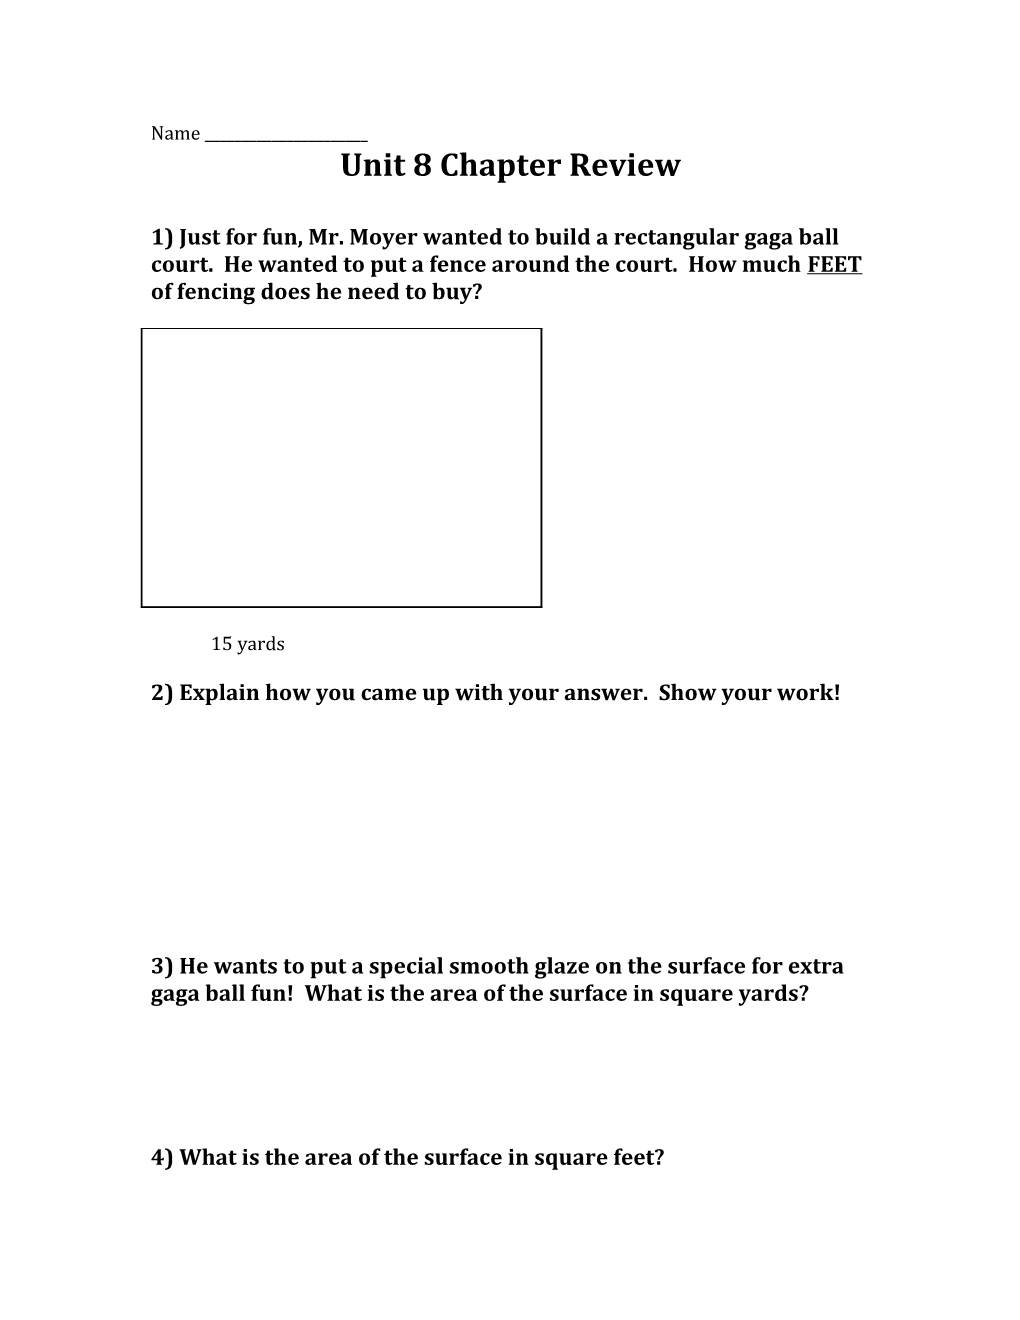 Unit 8 Chapter Review